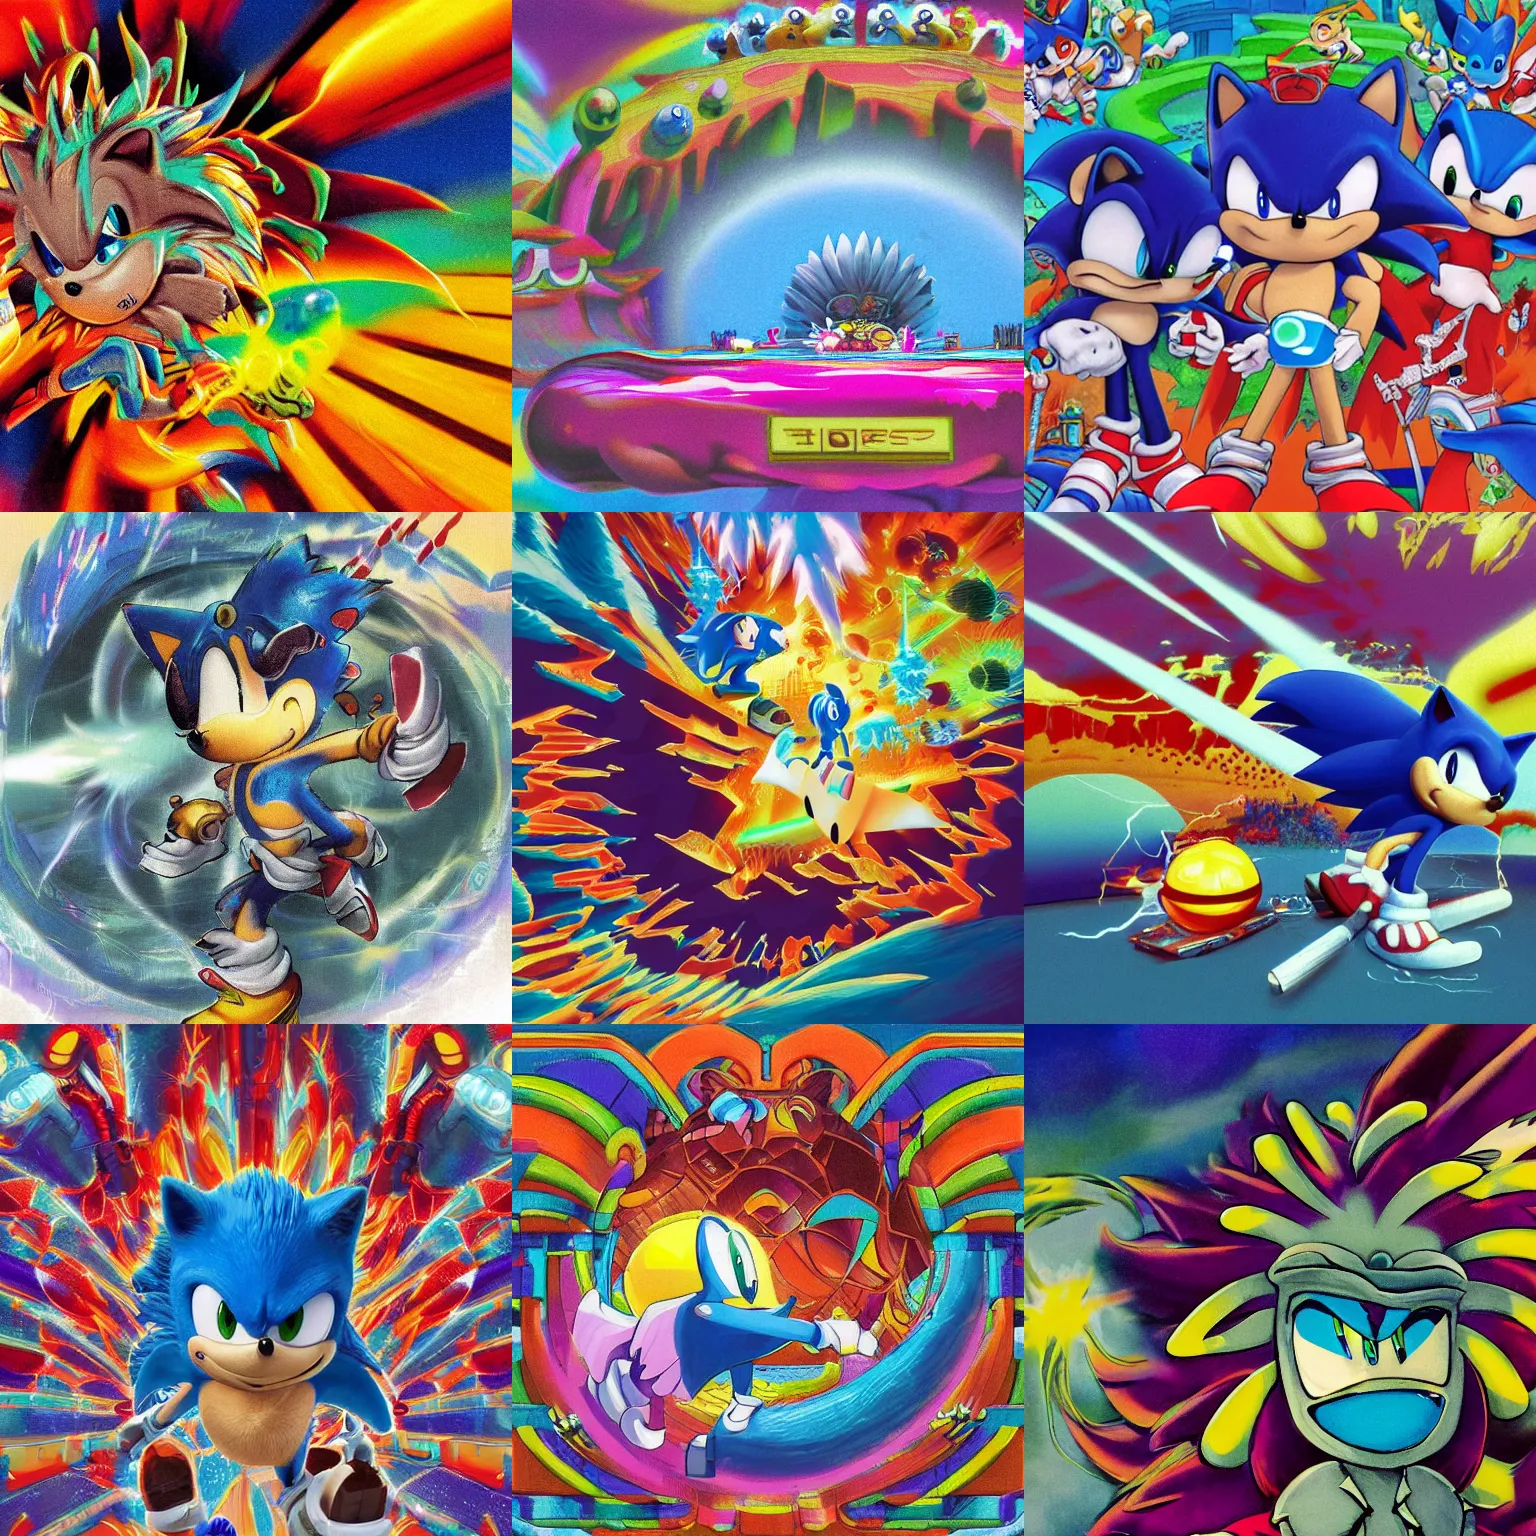 Prompt: close up sonic the hedgehog in a surreal, soft, minimalist, professional, high quality airbrush art mgmt shpongle album cover of a chrome dissolving LSD DMT blue sonic the hedgehog surfing through vaporwave caves, checkerboard horizon , 1980s 1982 Sega Genesis video game album cover